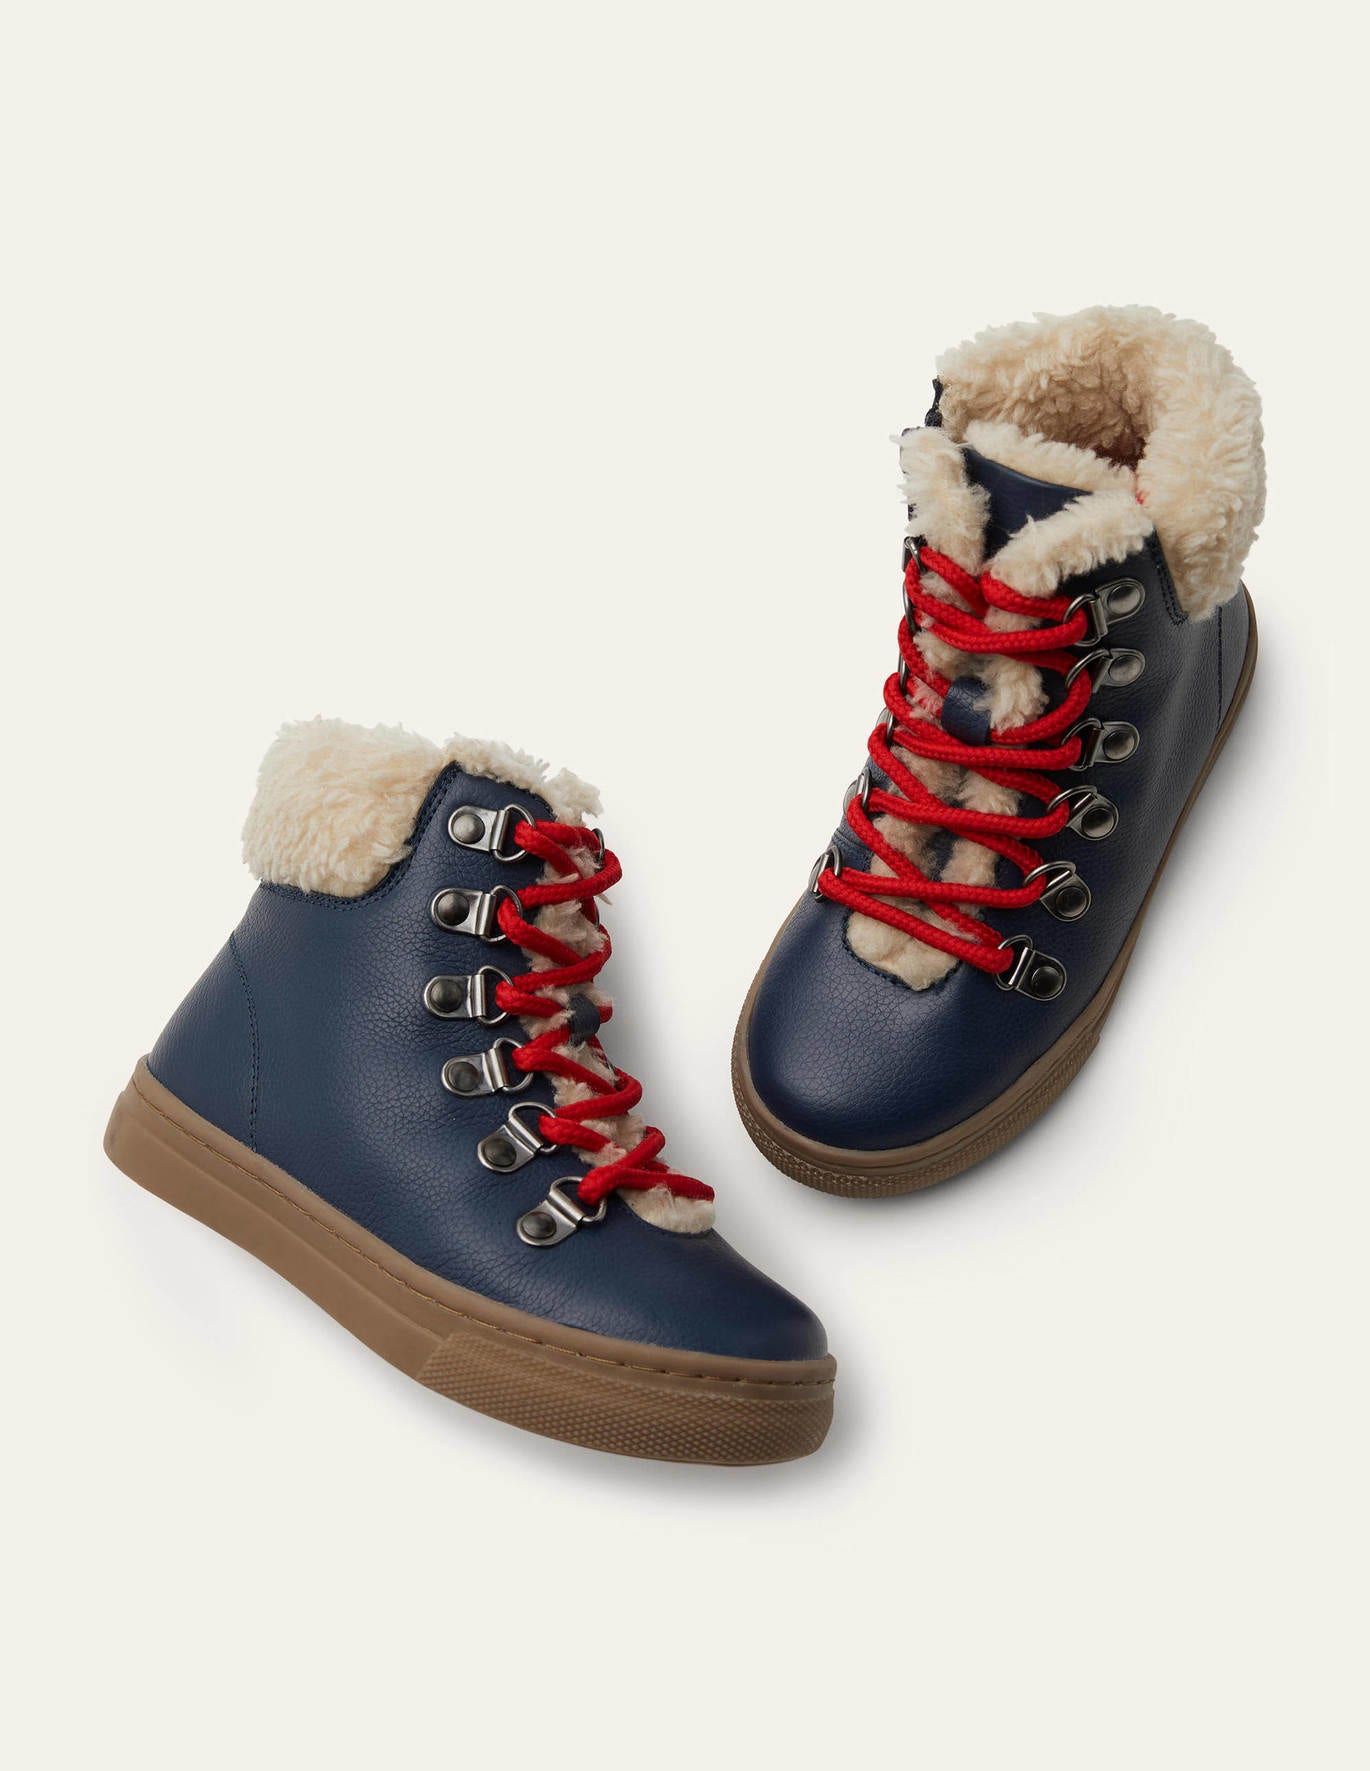 Boden Cosy Leather Lace Up Boots - Navy